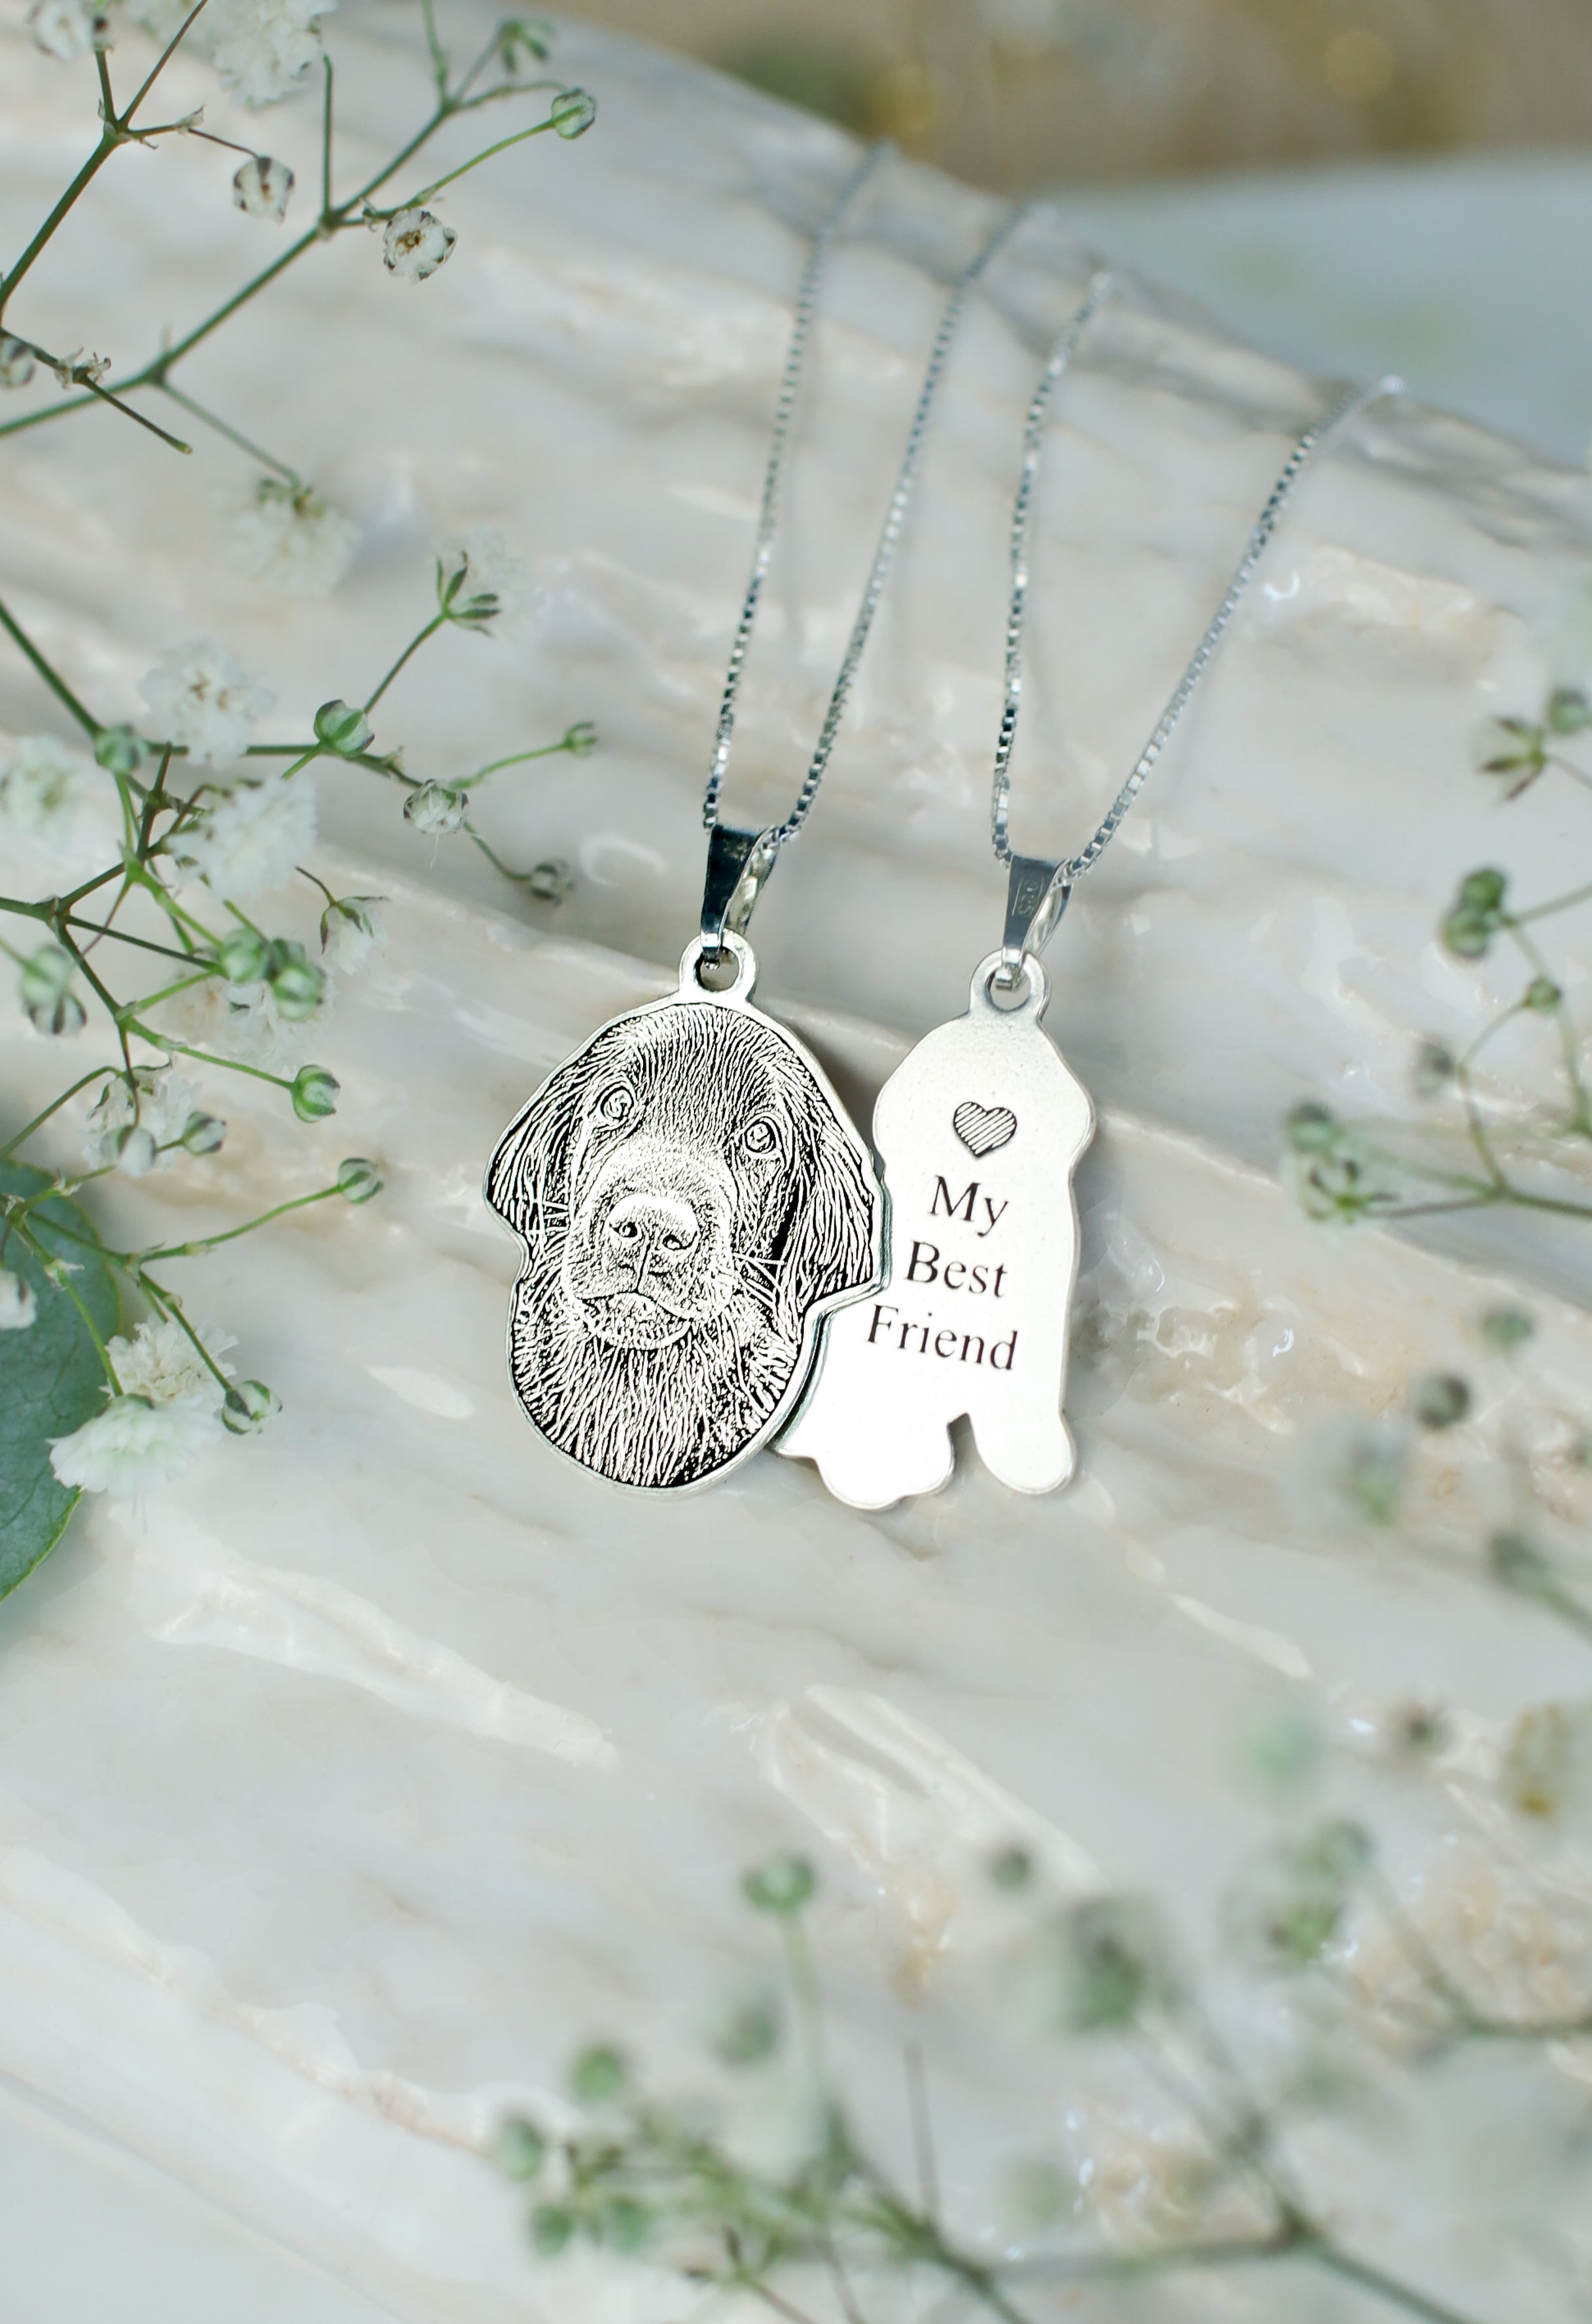 Engraving Ideas for Personalised Necklaces | Bloom Boutique